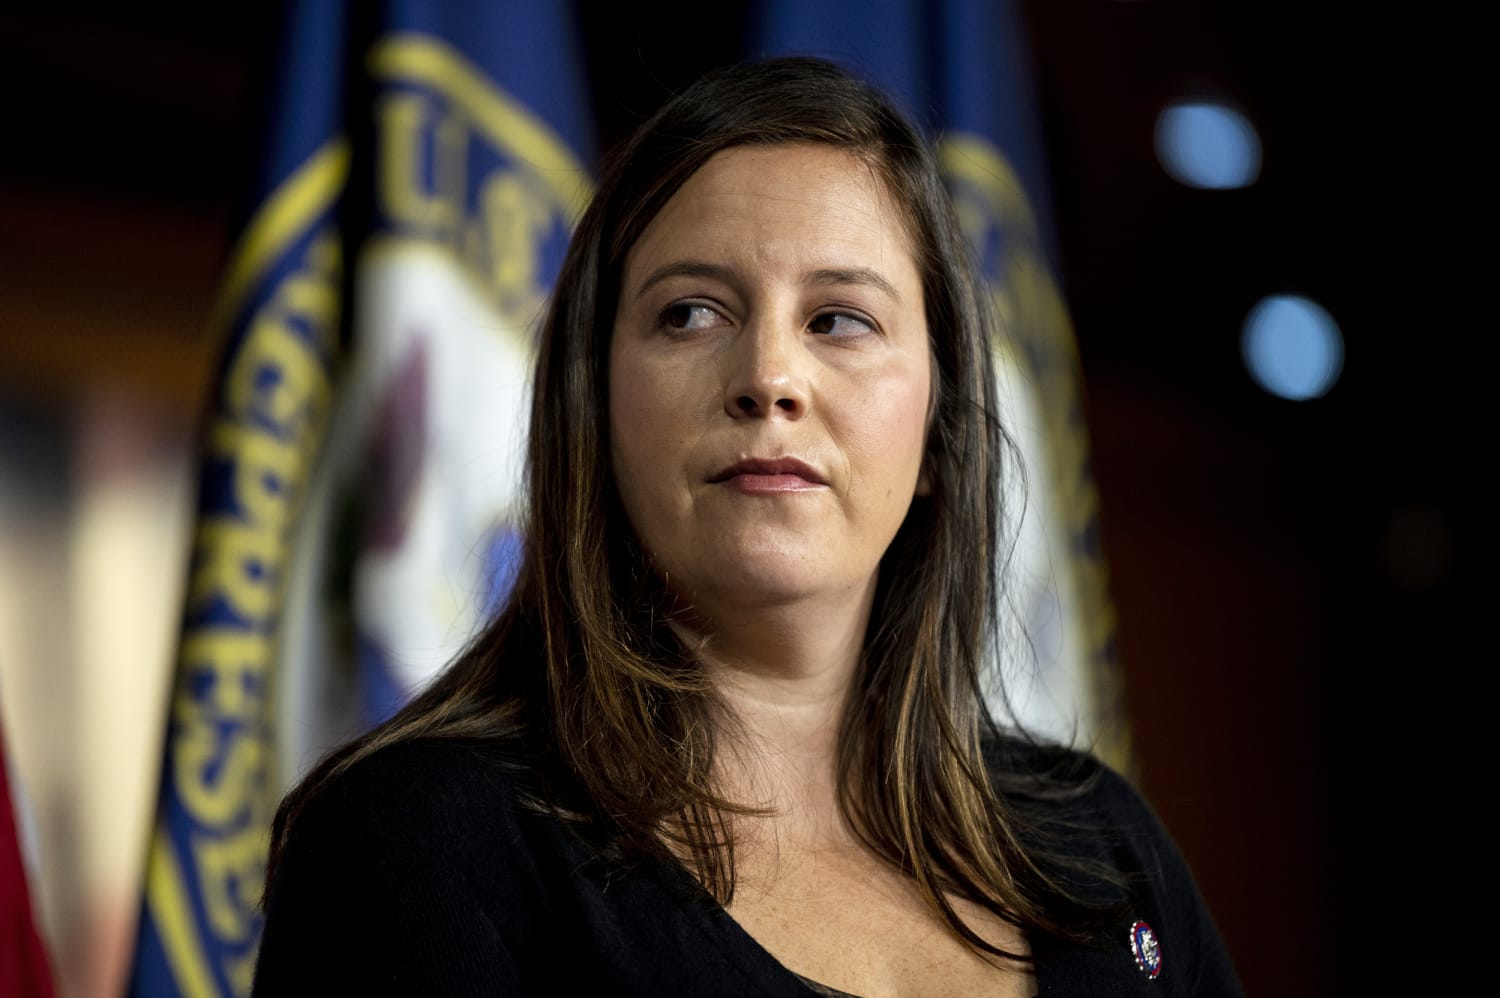 Stefanik claims credit for relief funds from law she opposed